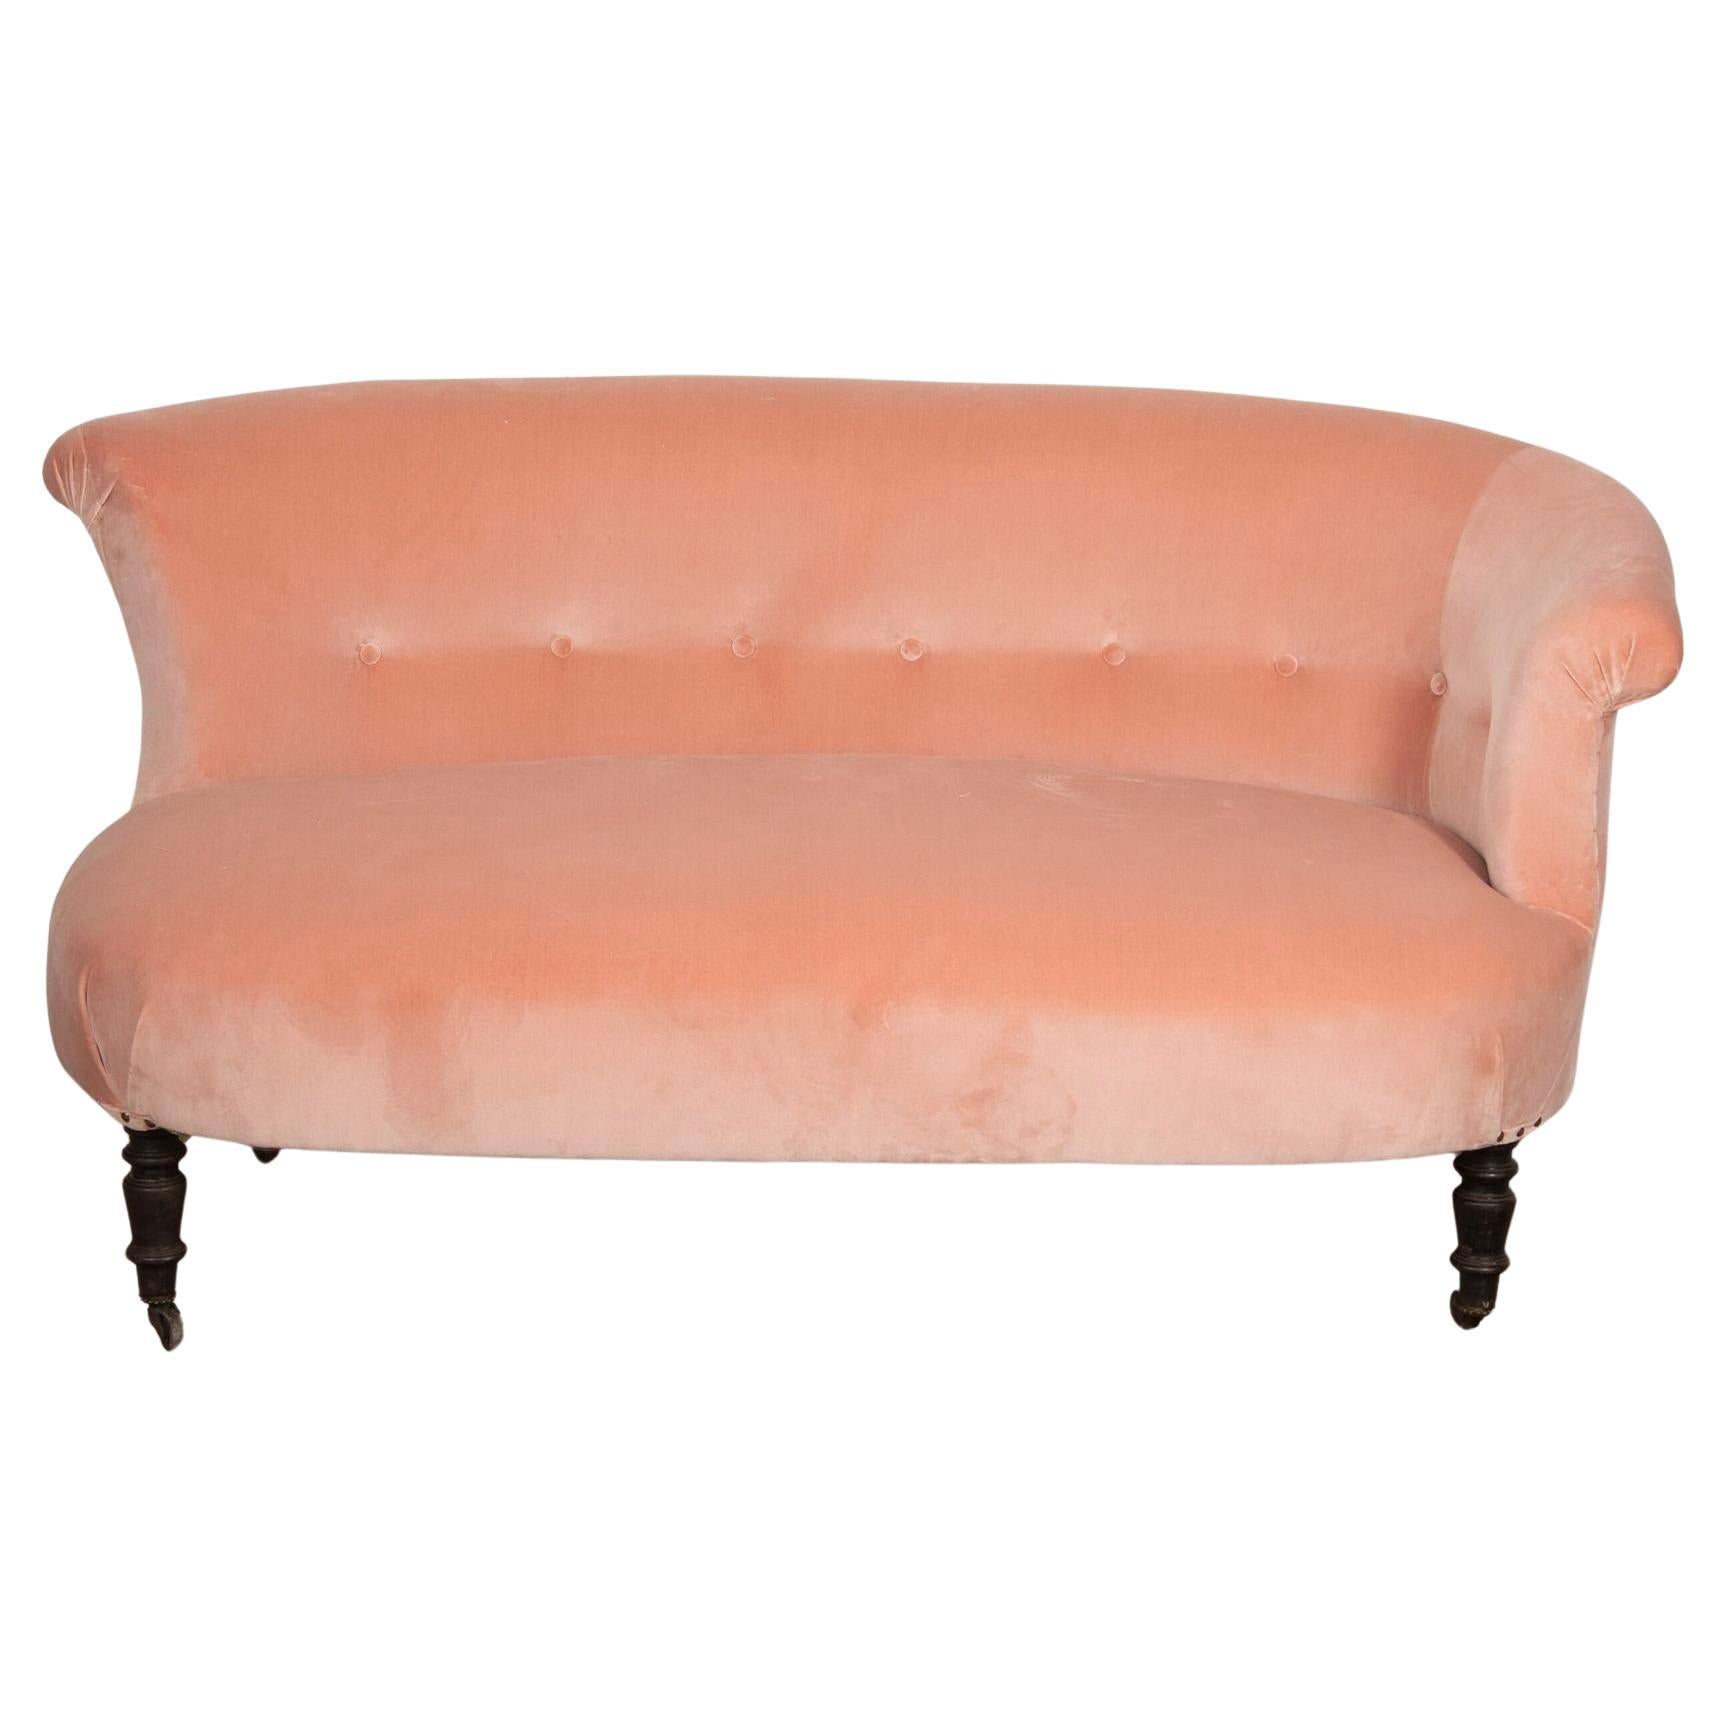 19th Century Upholstered Pink Banquette For Sale